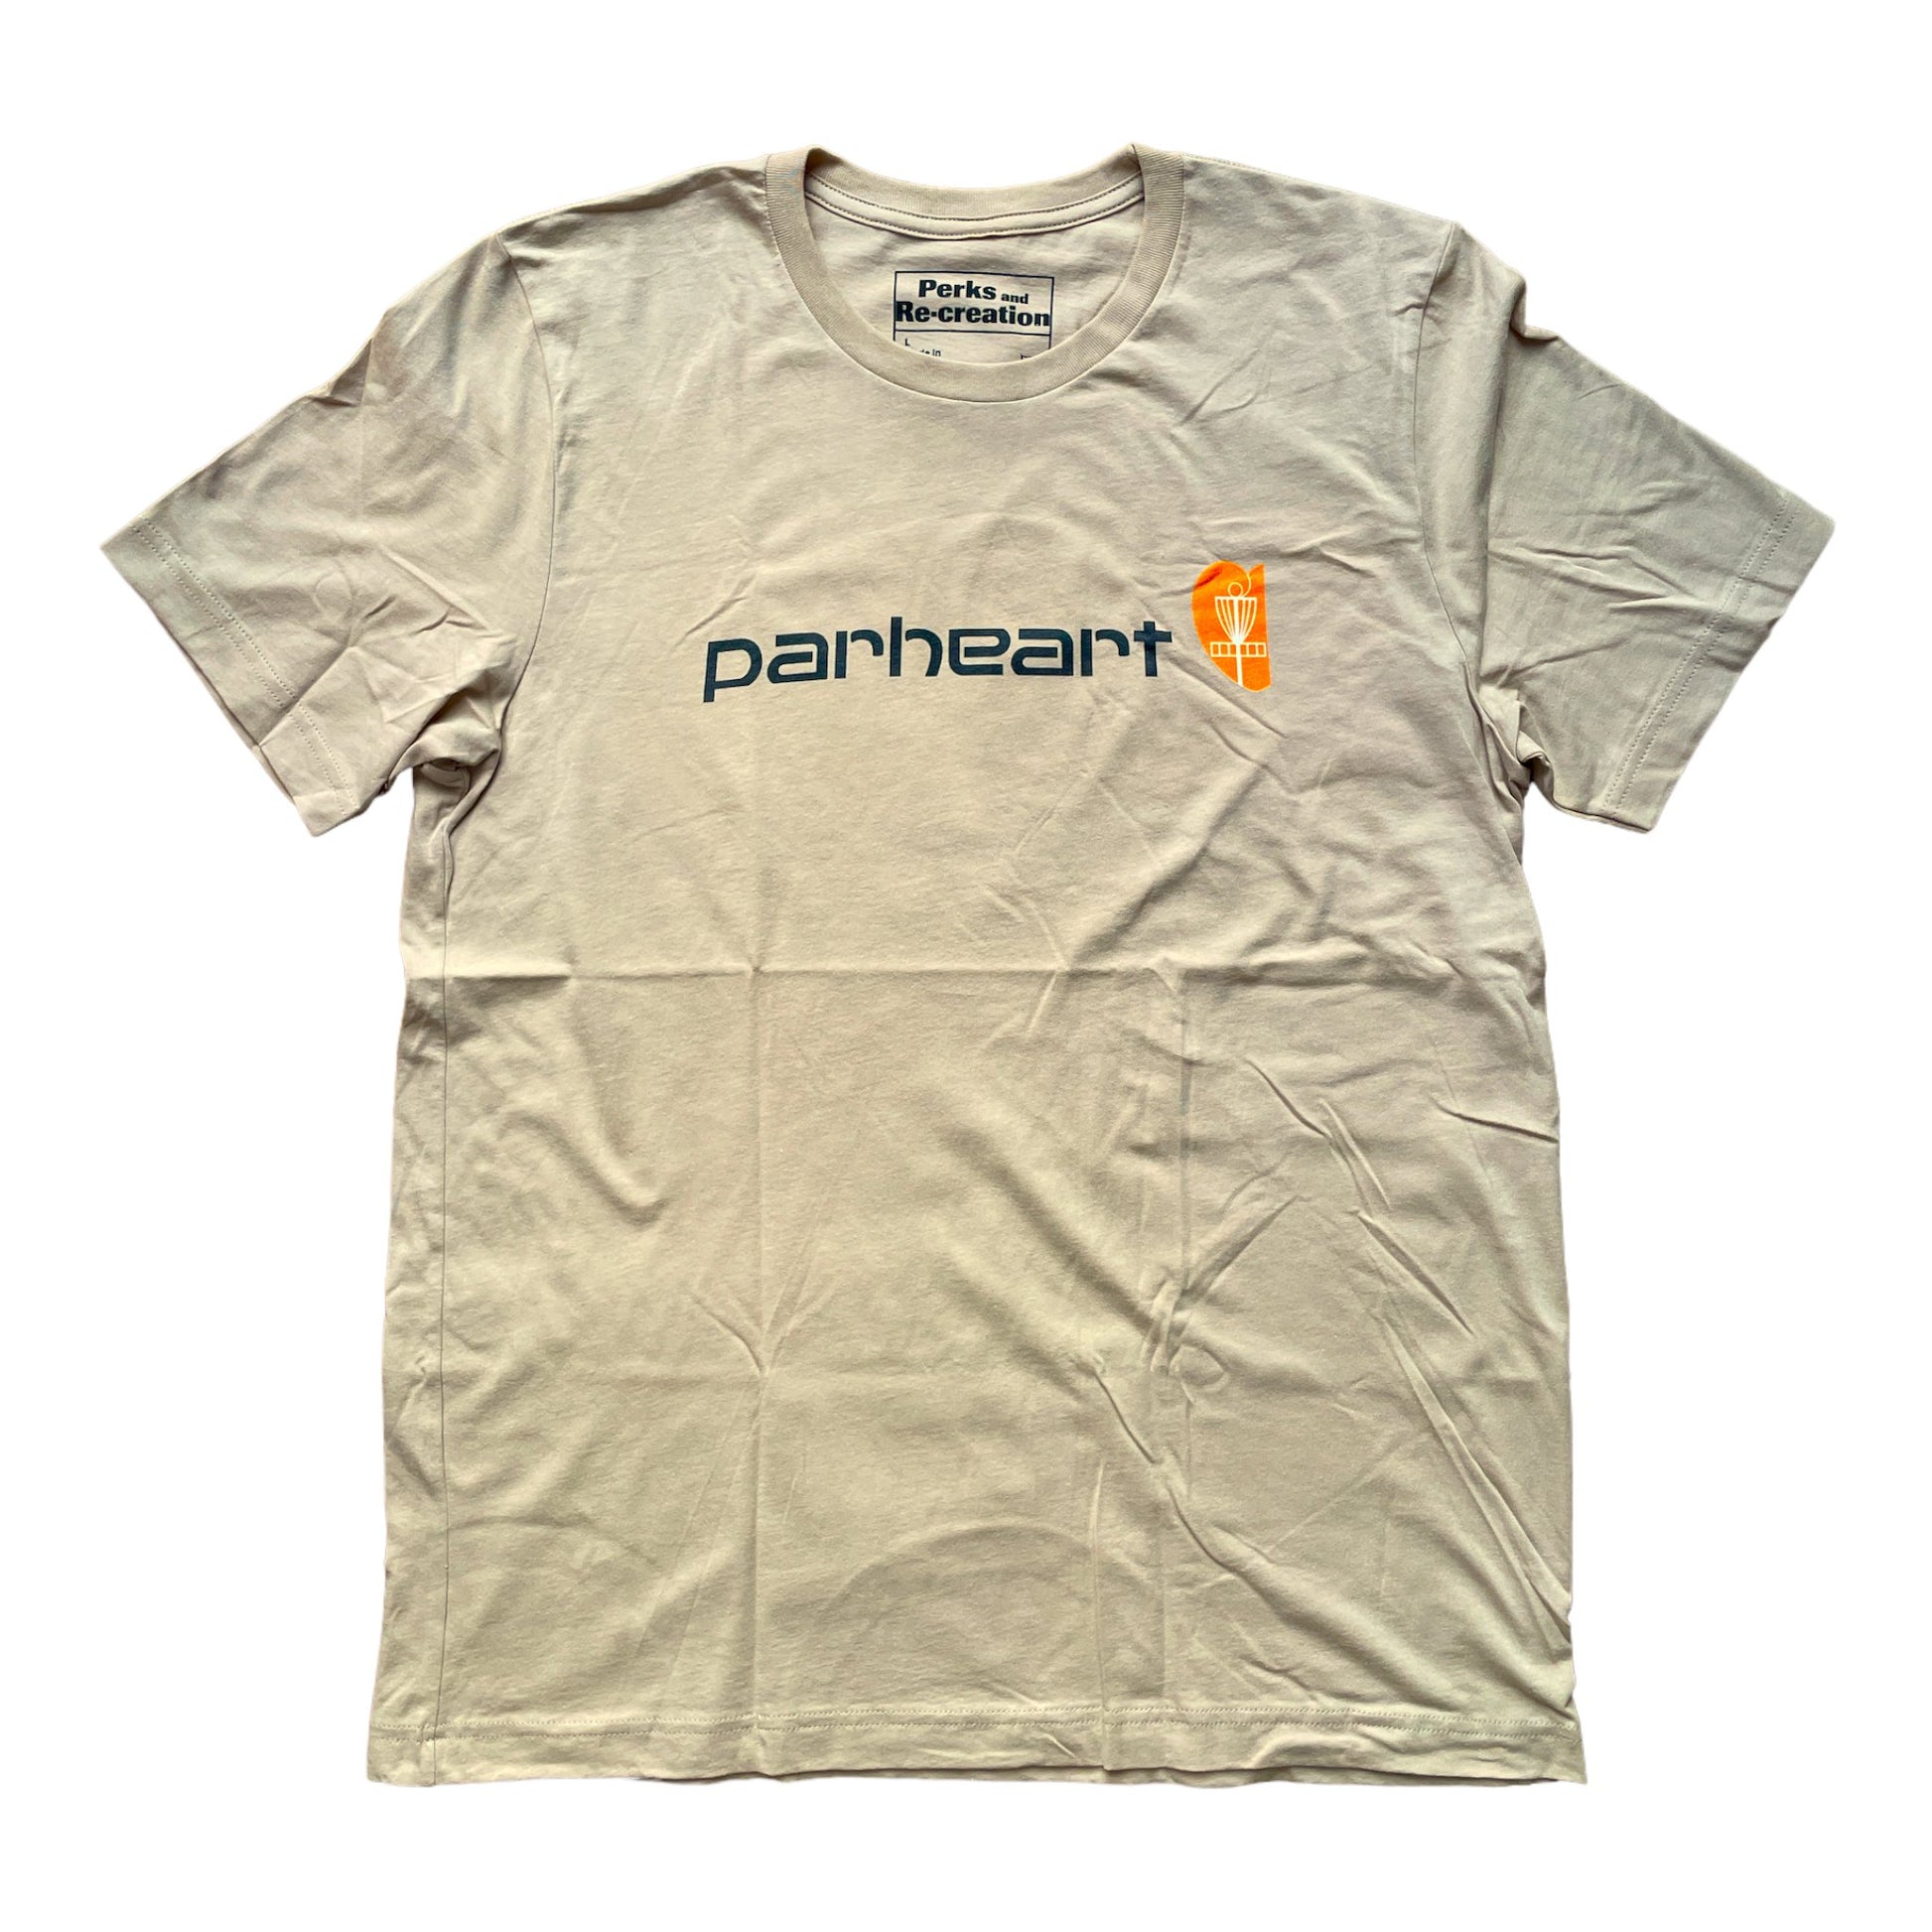 Perks and Re-creation Parheart Tee Disc Golf